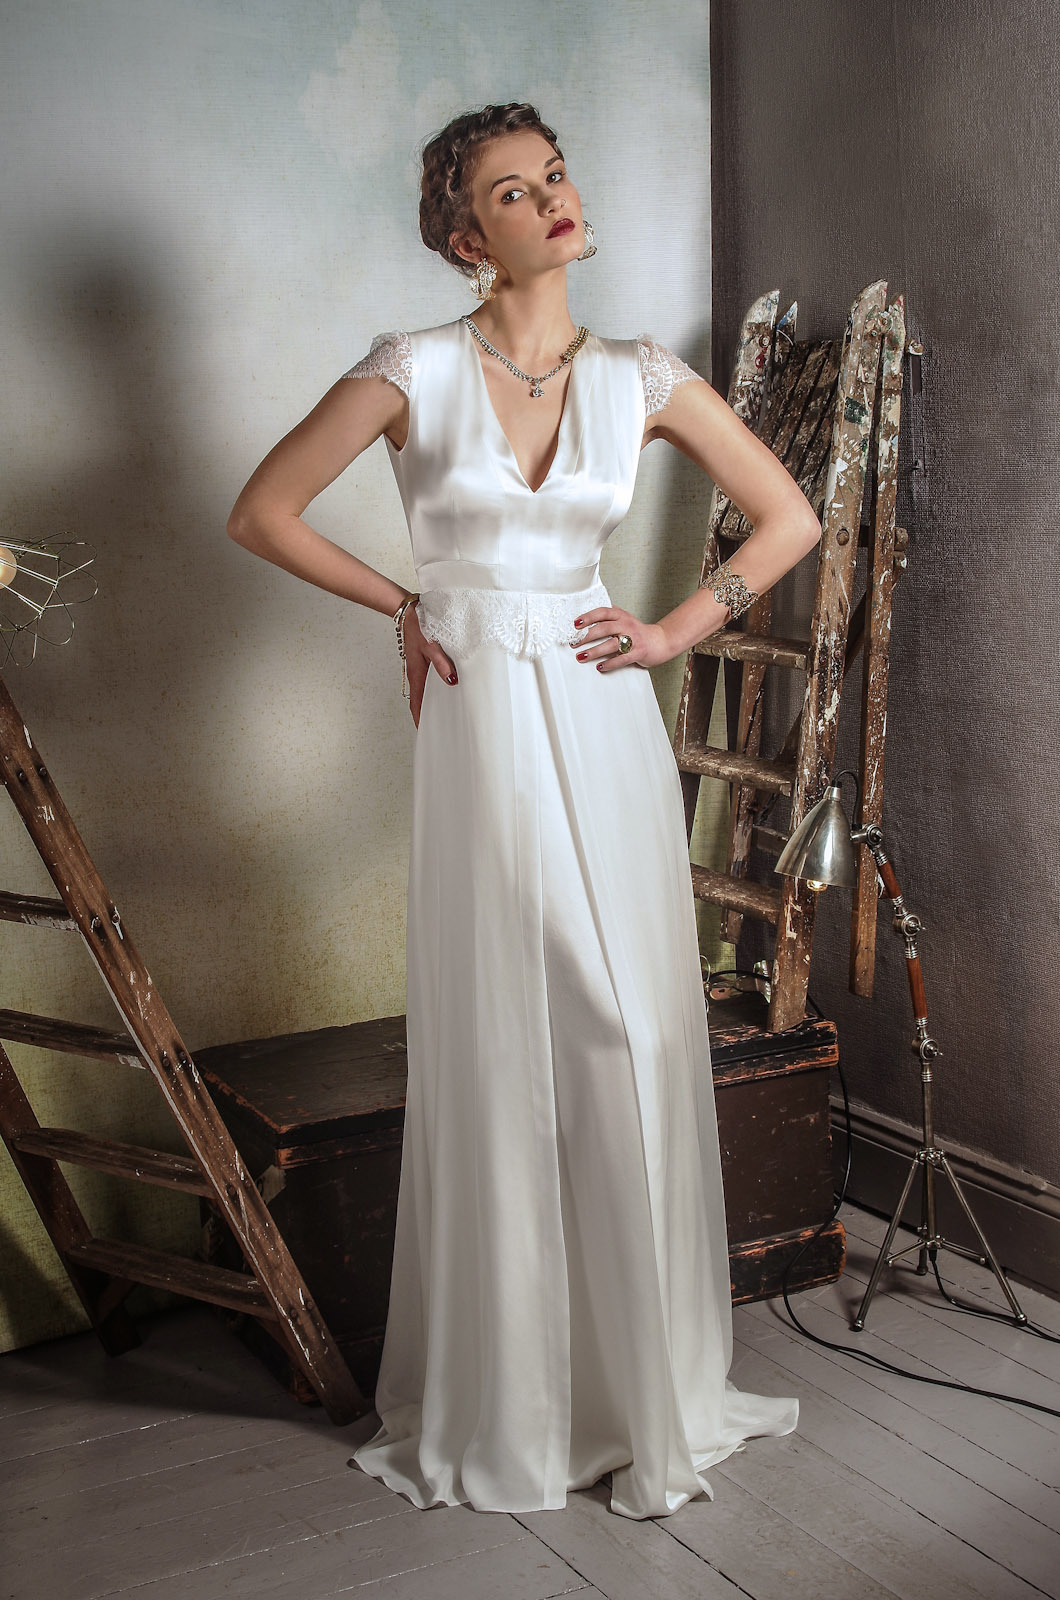 Belle & Bunty's 2014 Bridal Capsule Collection - Blossom